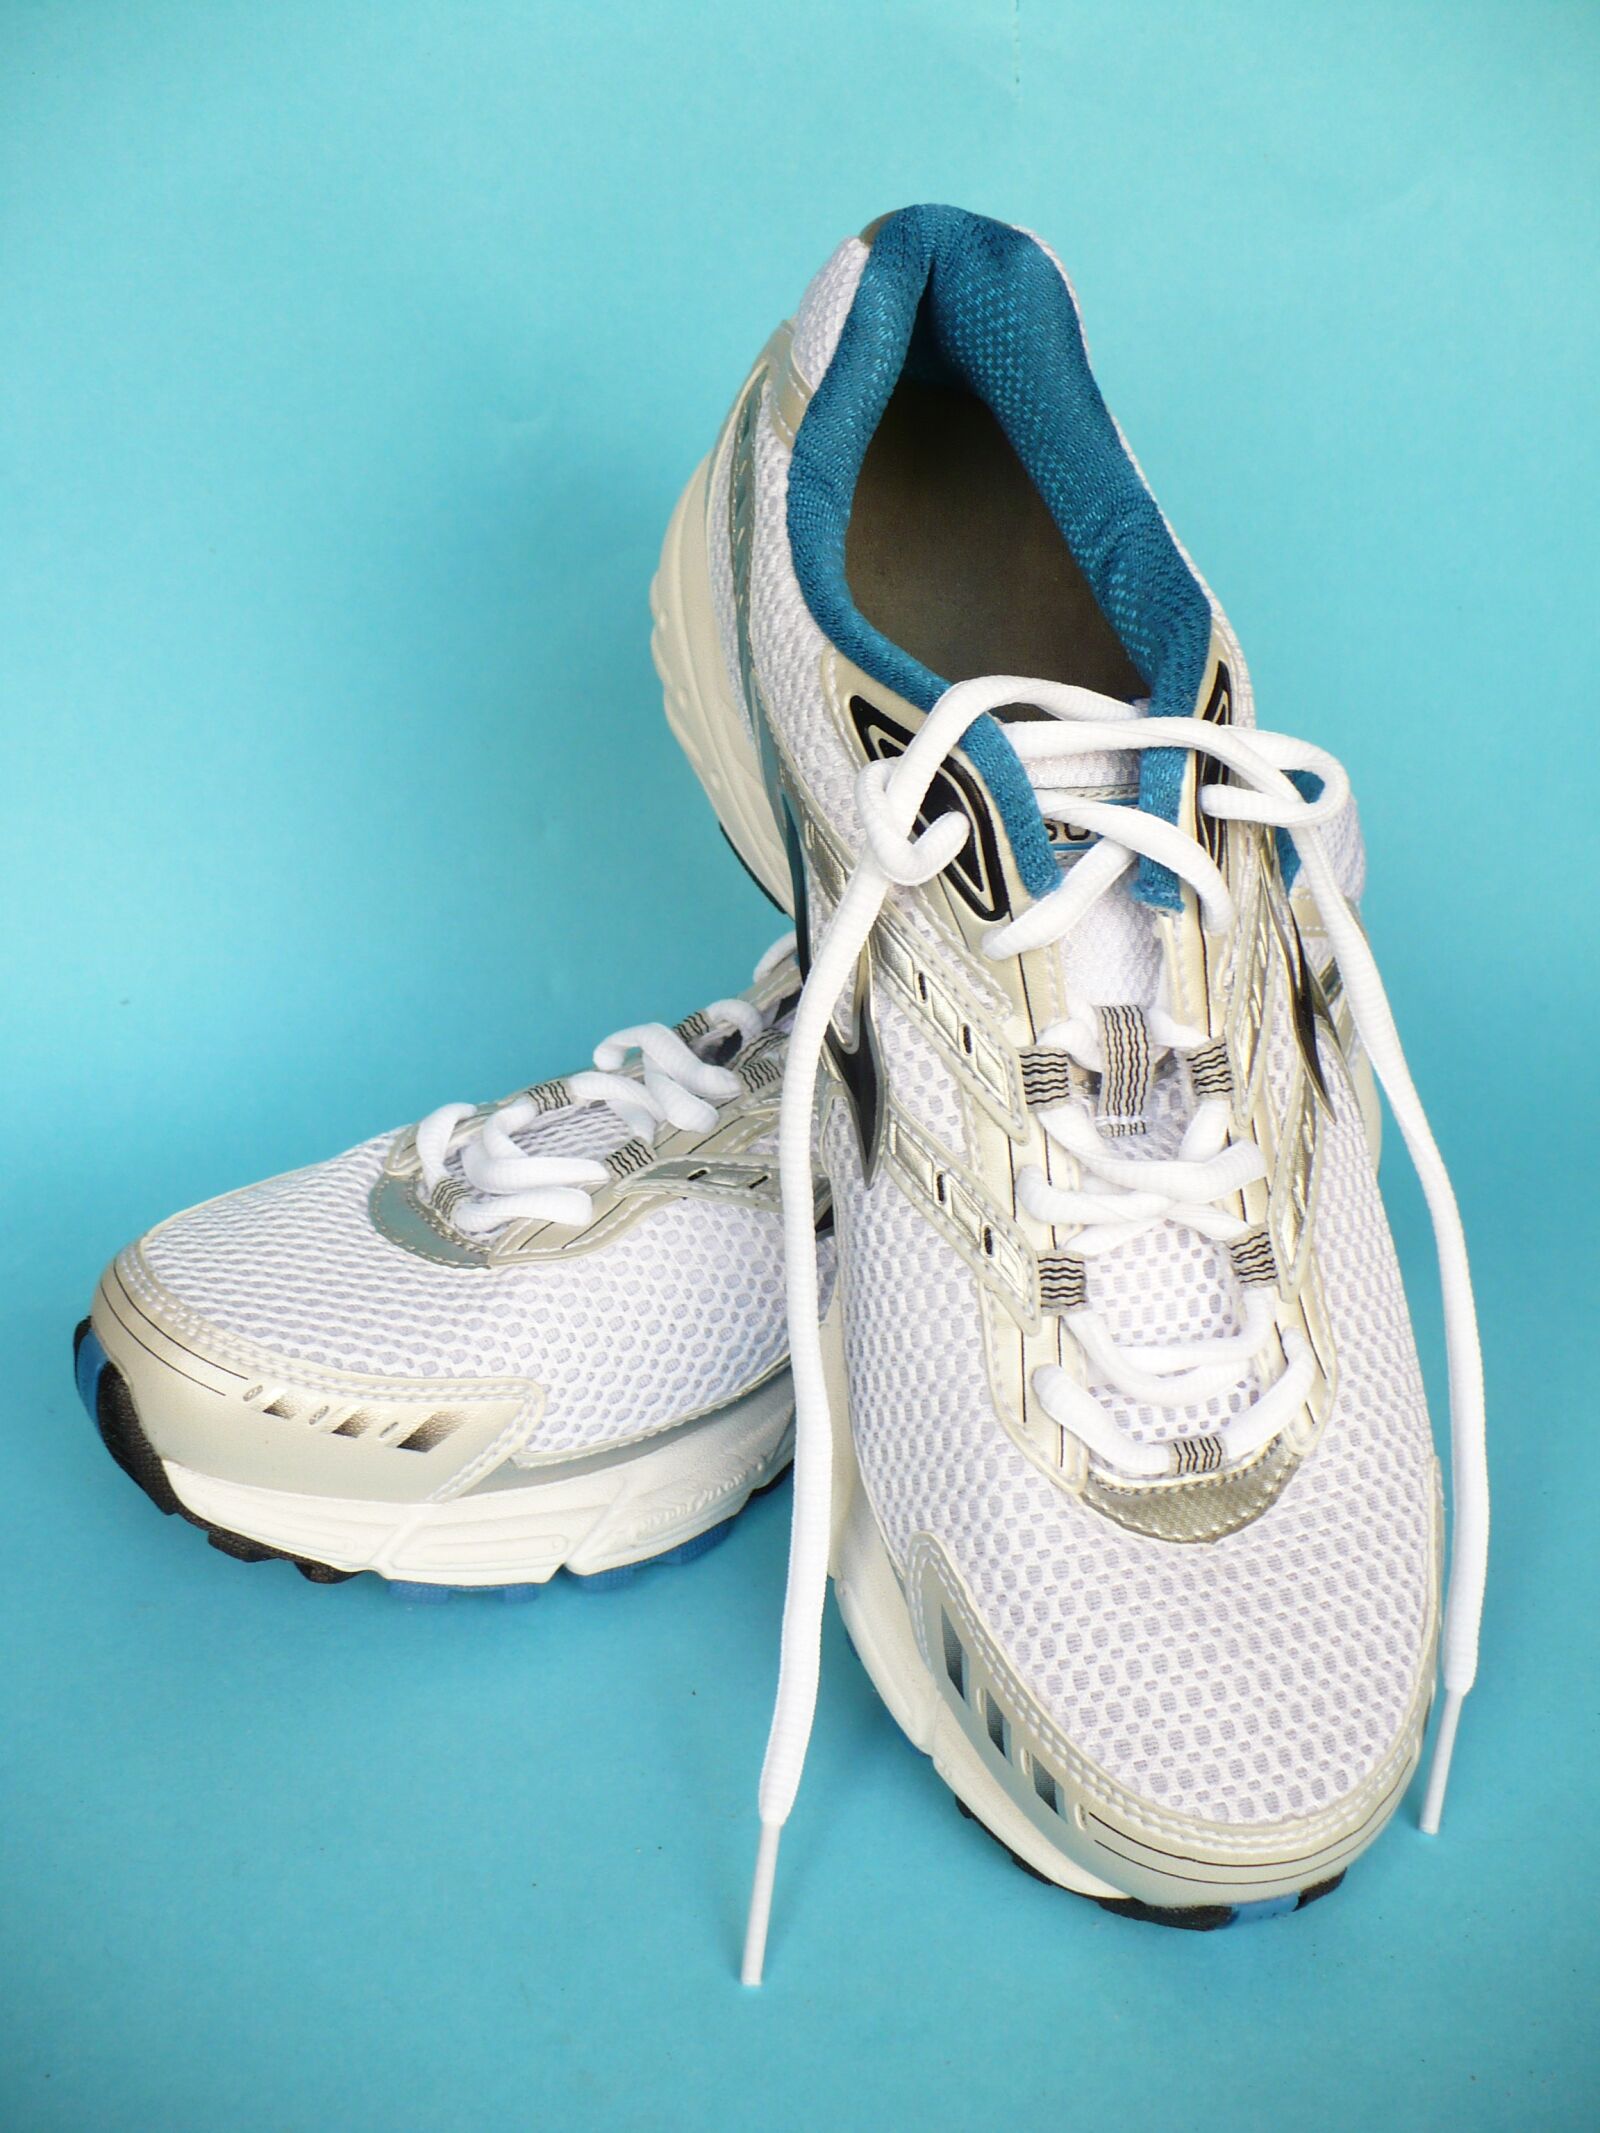 Panasonic DMC-LZ7 sample photo. Running shoes, shoes, sneakers photography